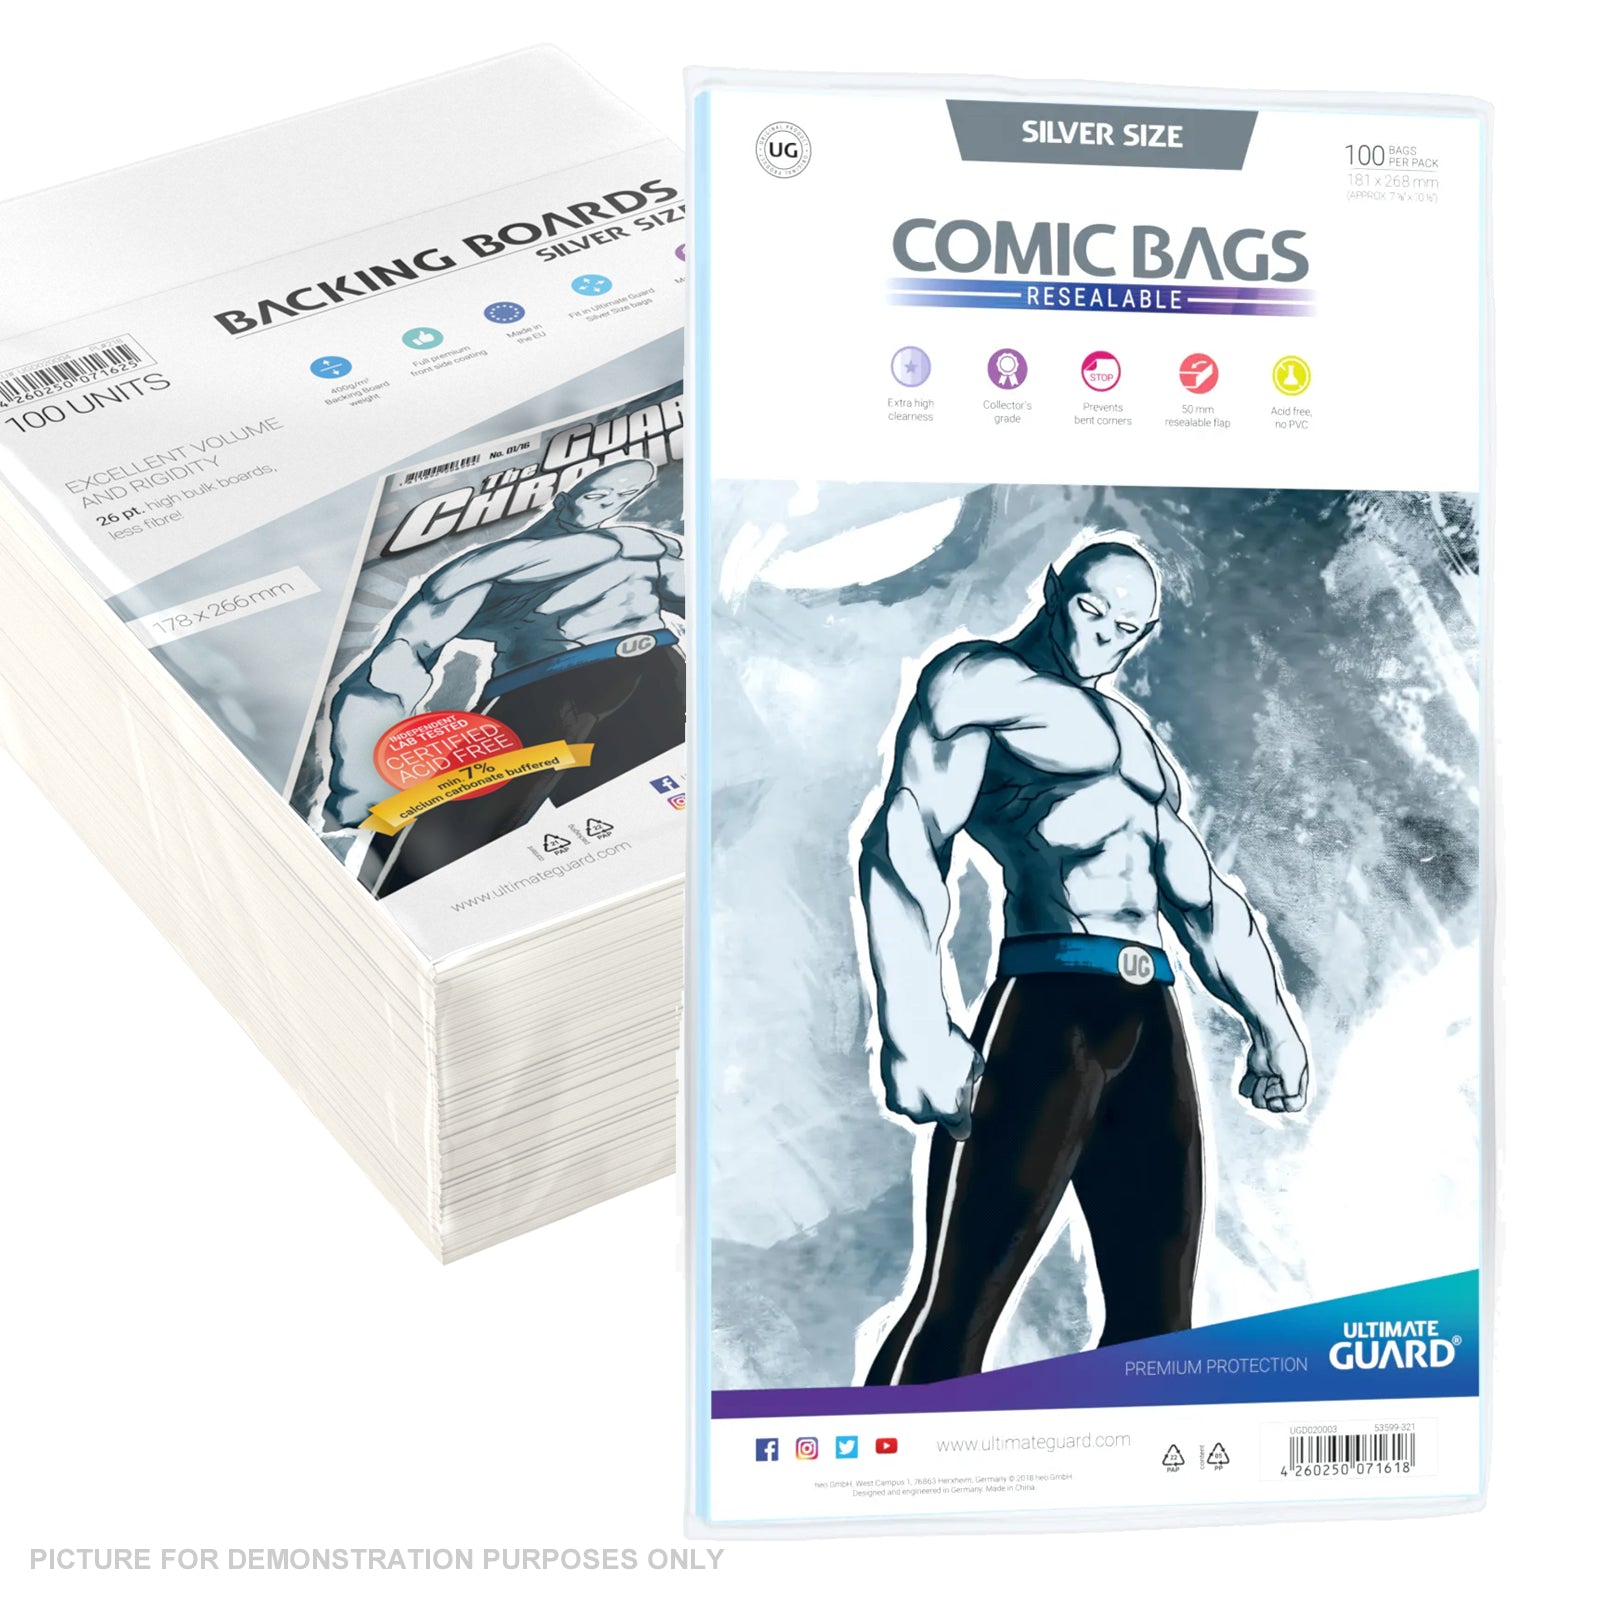 COMIC COMBO - ULTIMATE GUARD - RESEALABLE SILVER Size Comic Bags & Backing Boards x 100